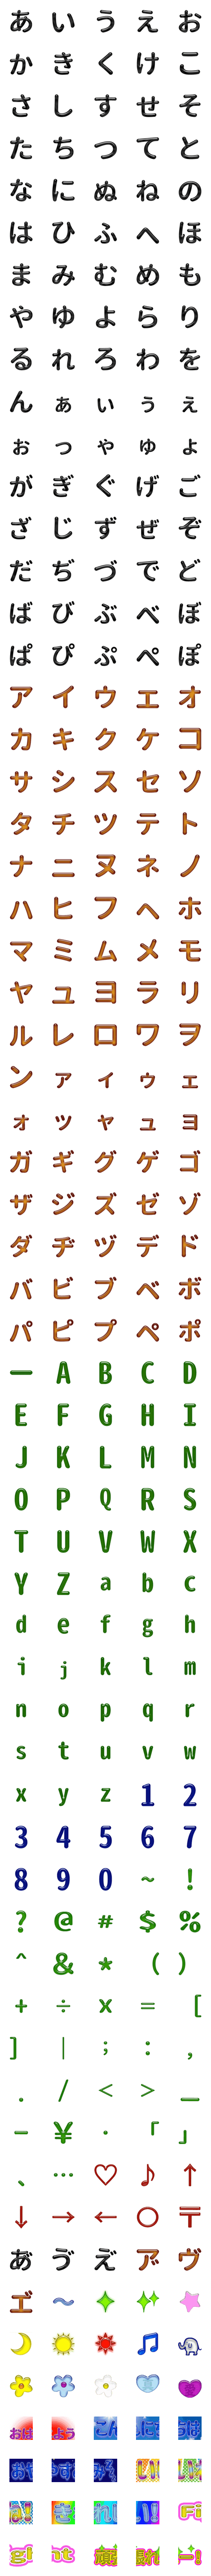 [LINE絵文字]ガラスの絵文字305の画像一覧